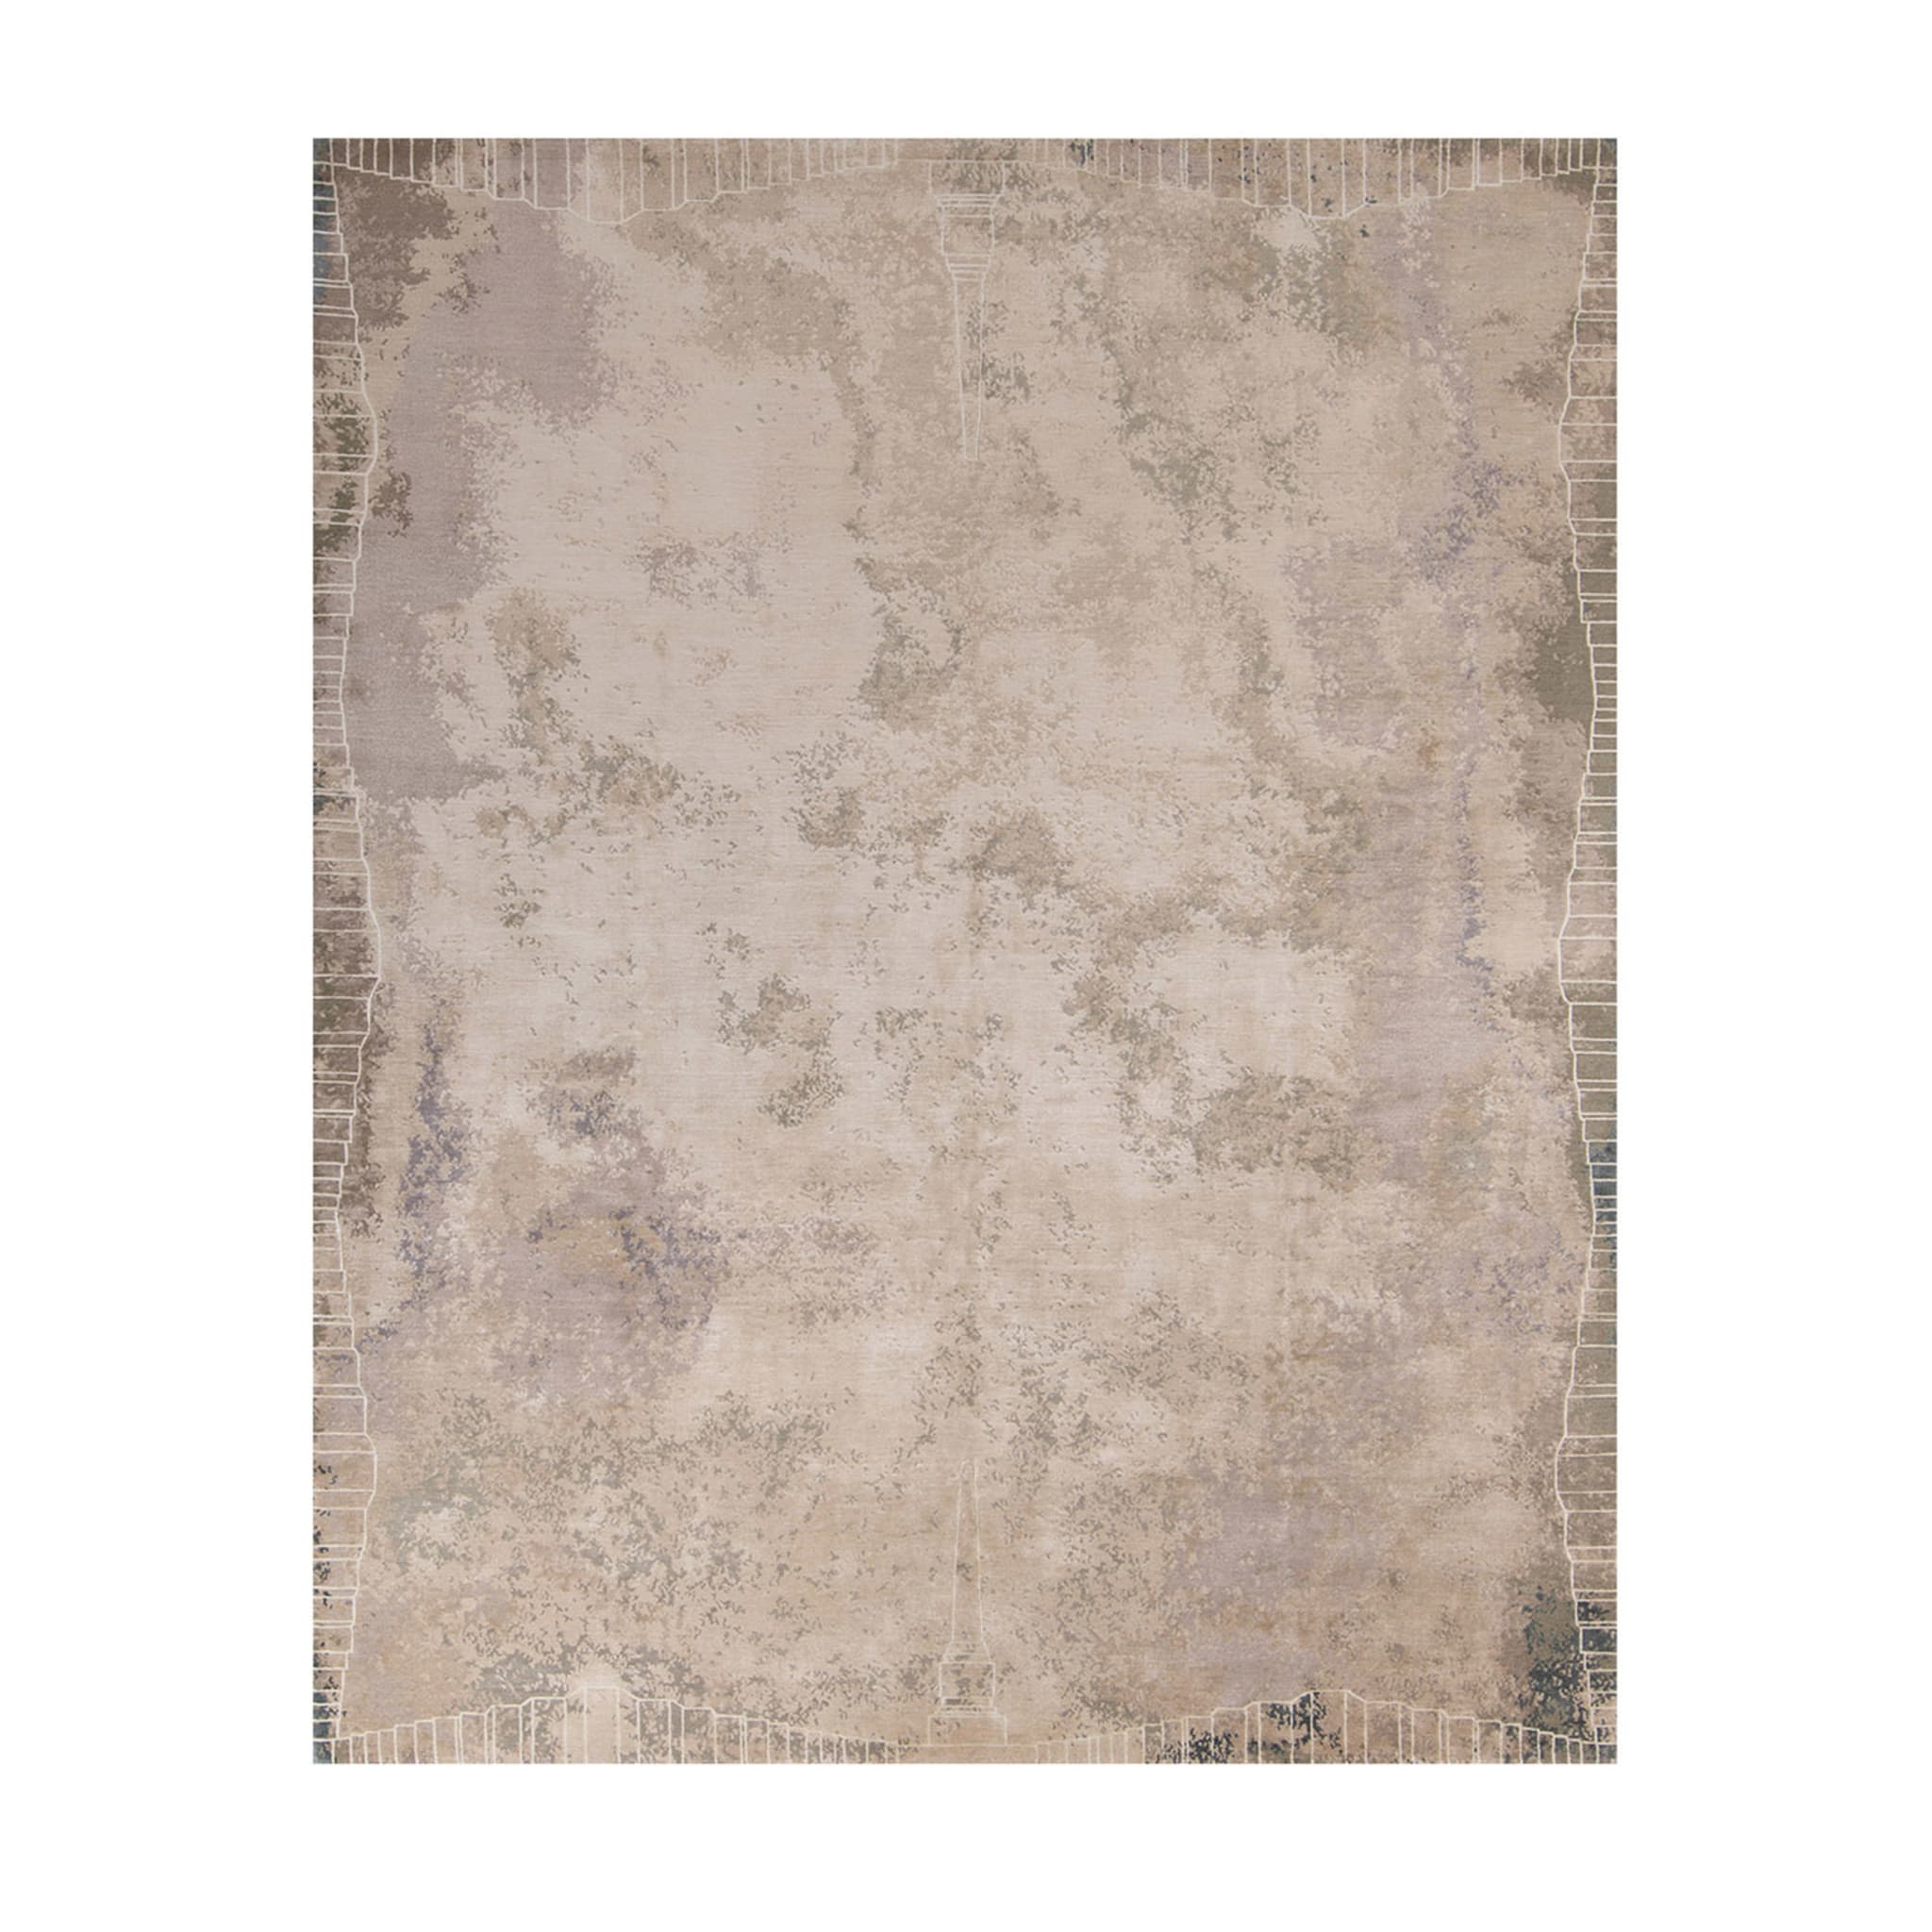 La Scala Collection Roma Camouflage Rug by Mike Shilov - Main view